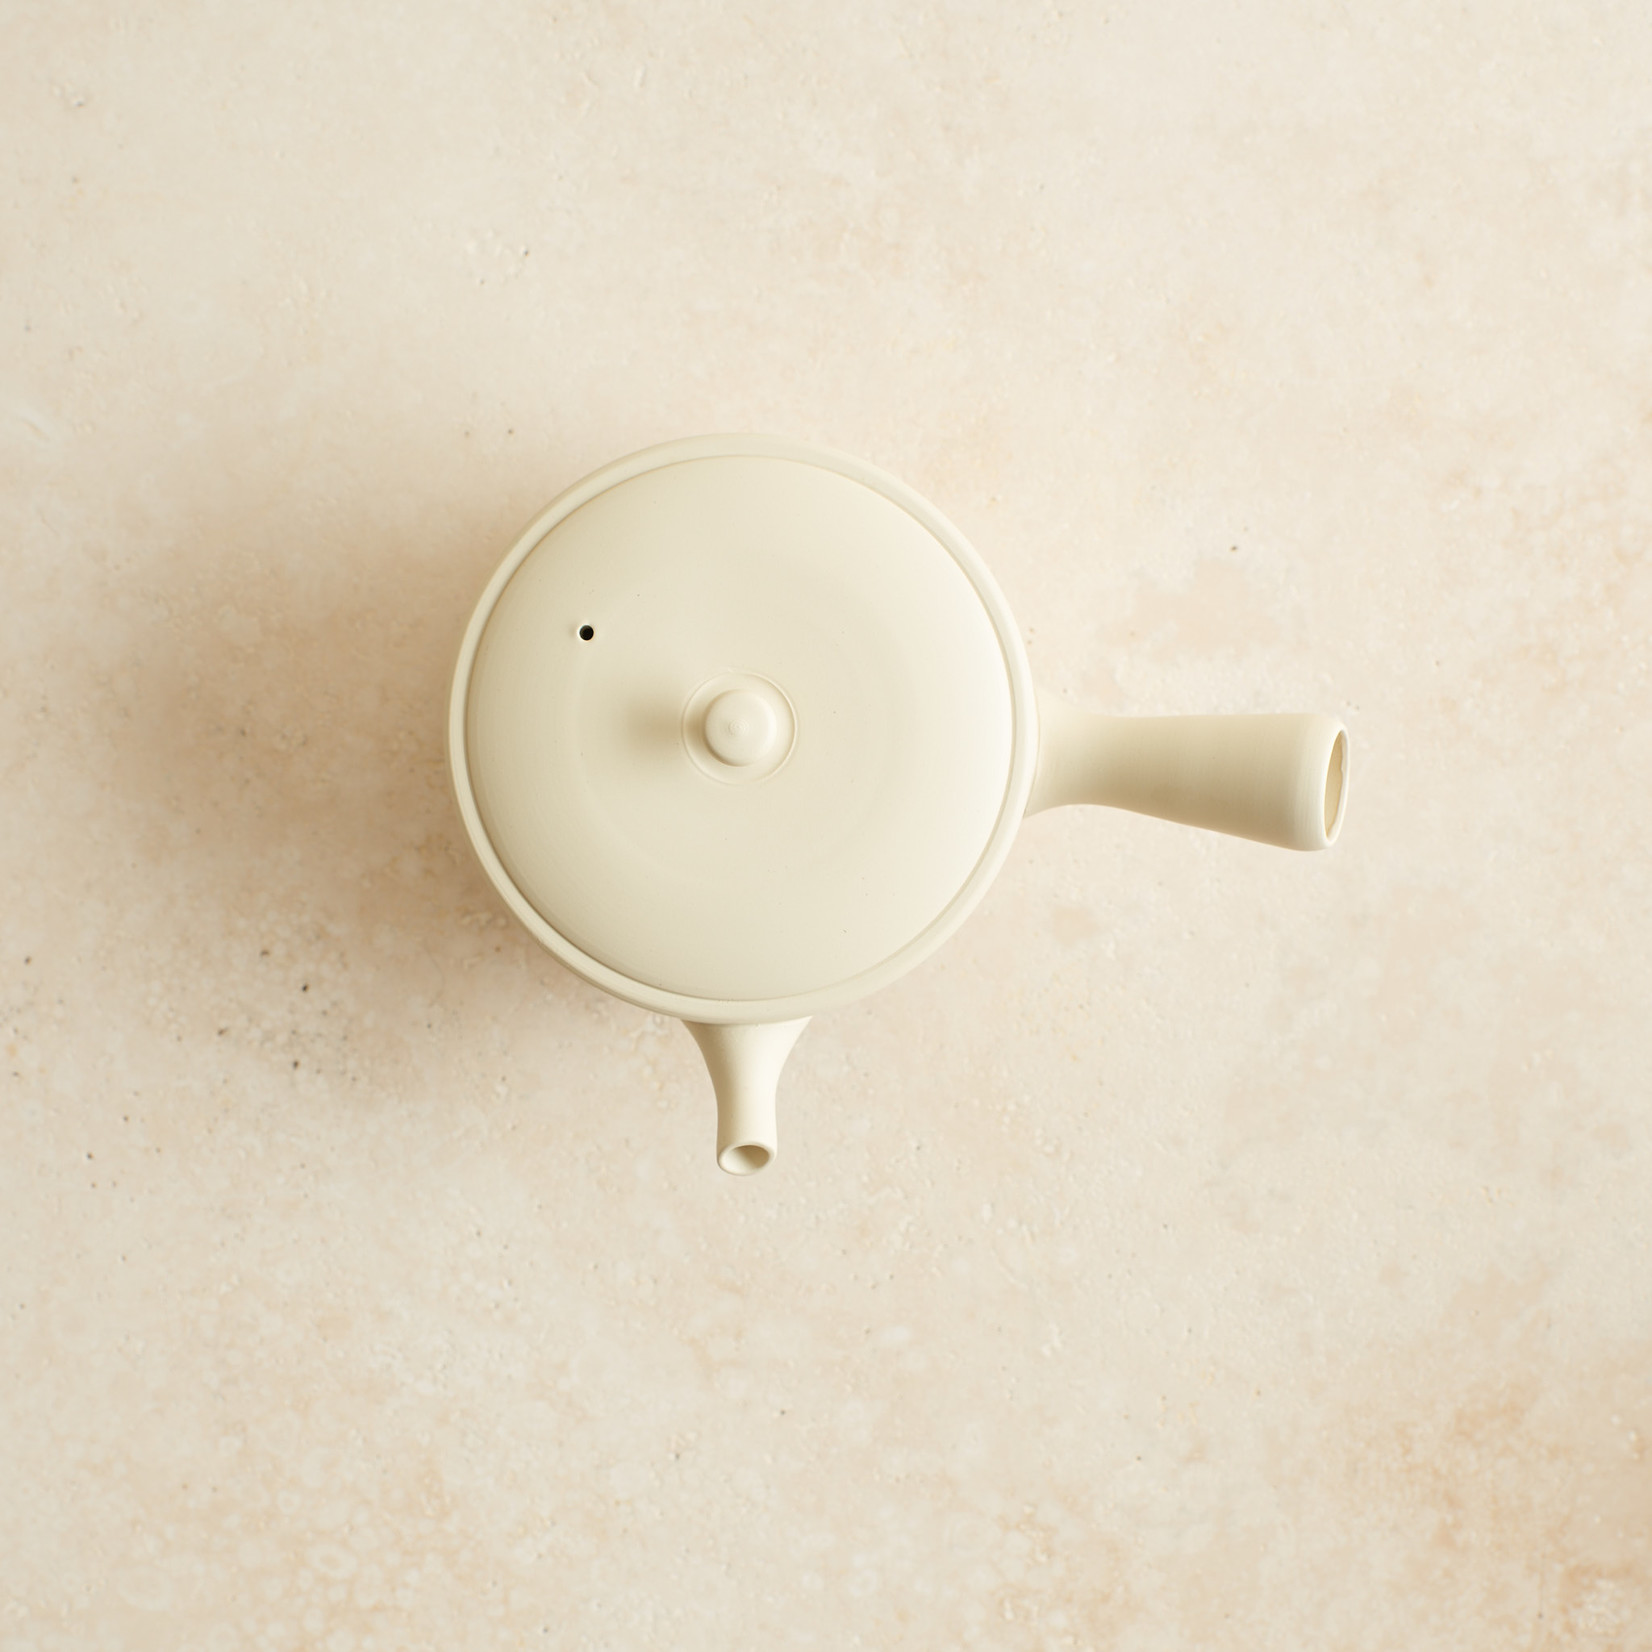 Traditional Japanese Teapot - ivory 6 ounce